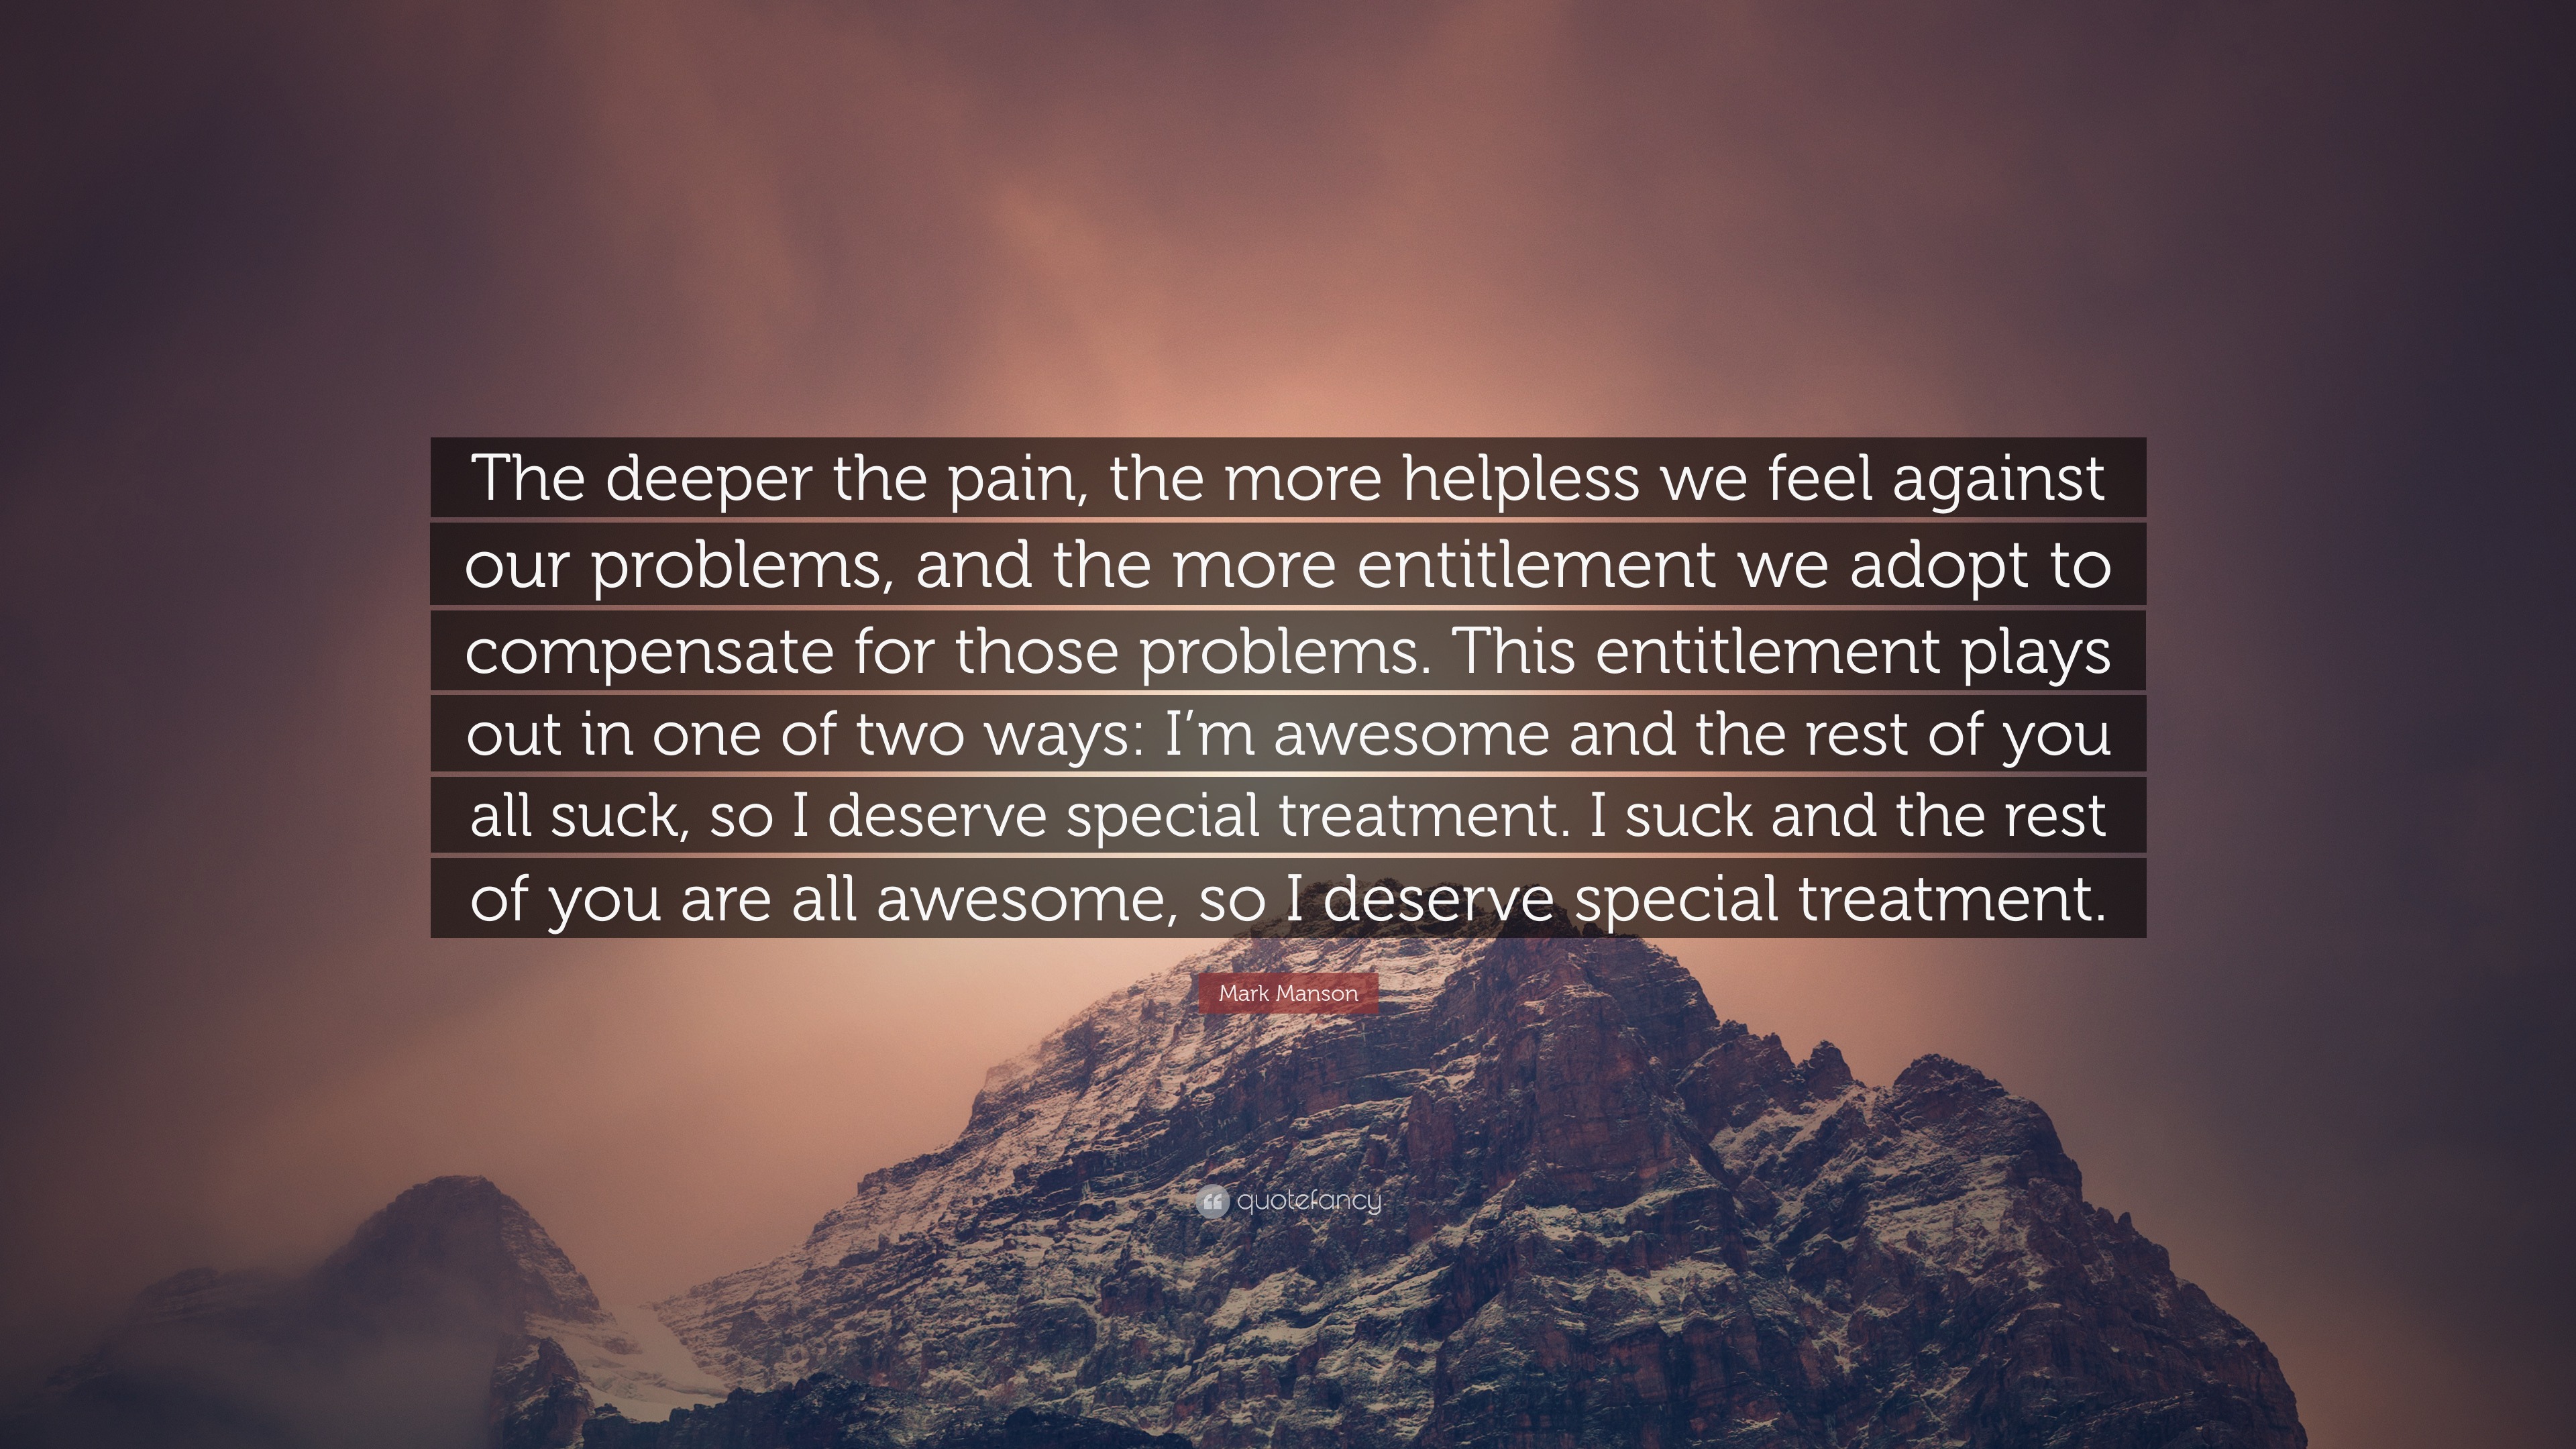 Mark Manson Quote: “The deeper the pain, the more helpless we feel against  our problems, and the more entitlement we adopt to compensate for”